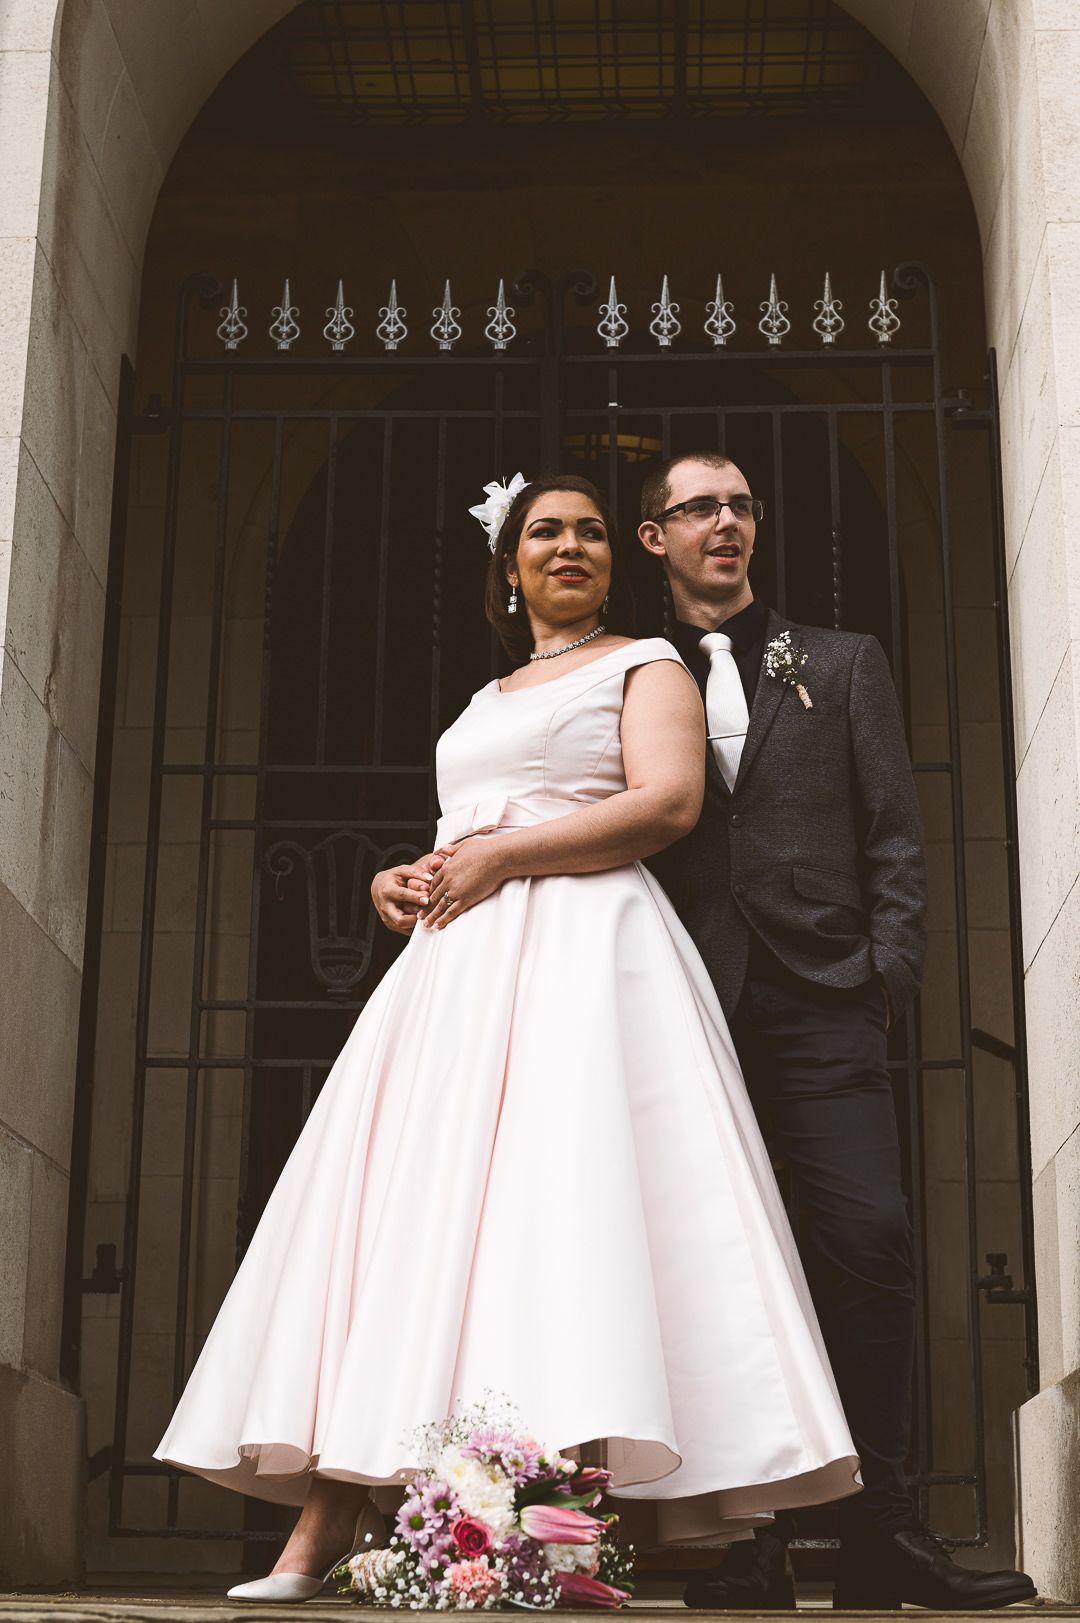 the camera is looking up at the couple as they stand in front of the town hall